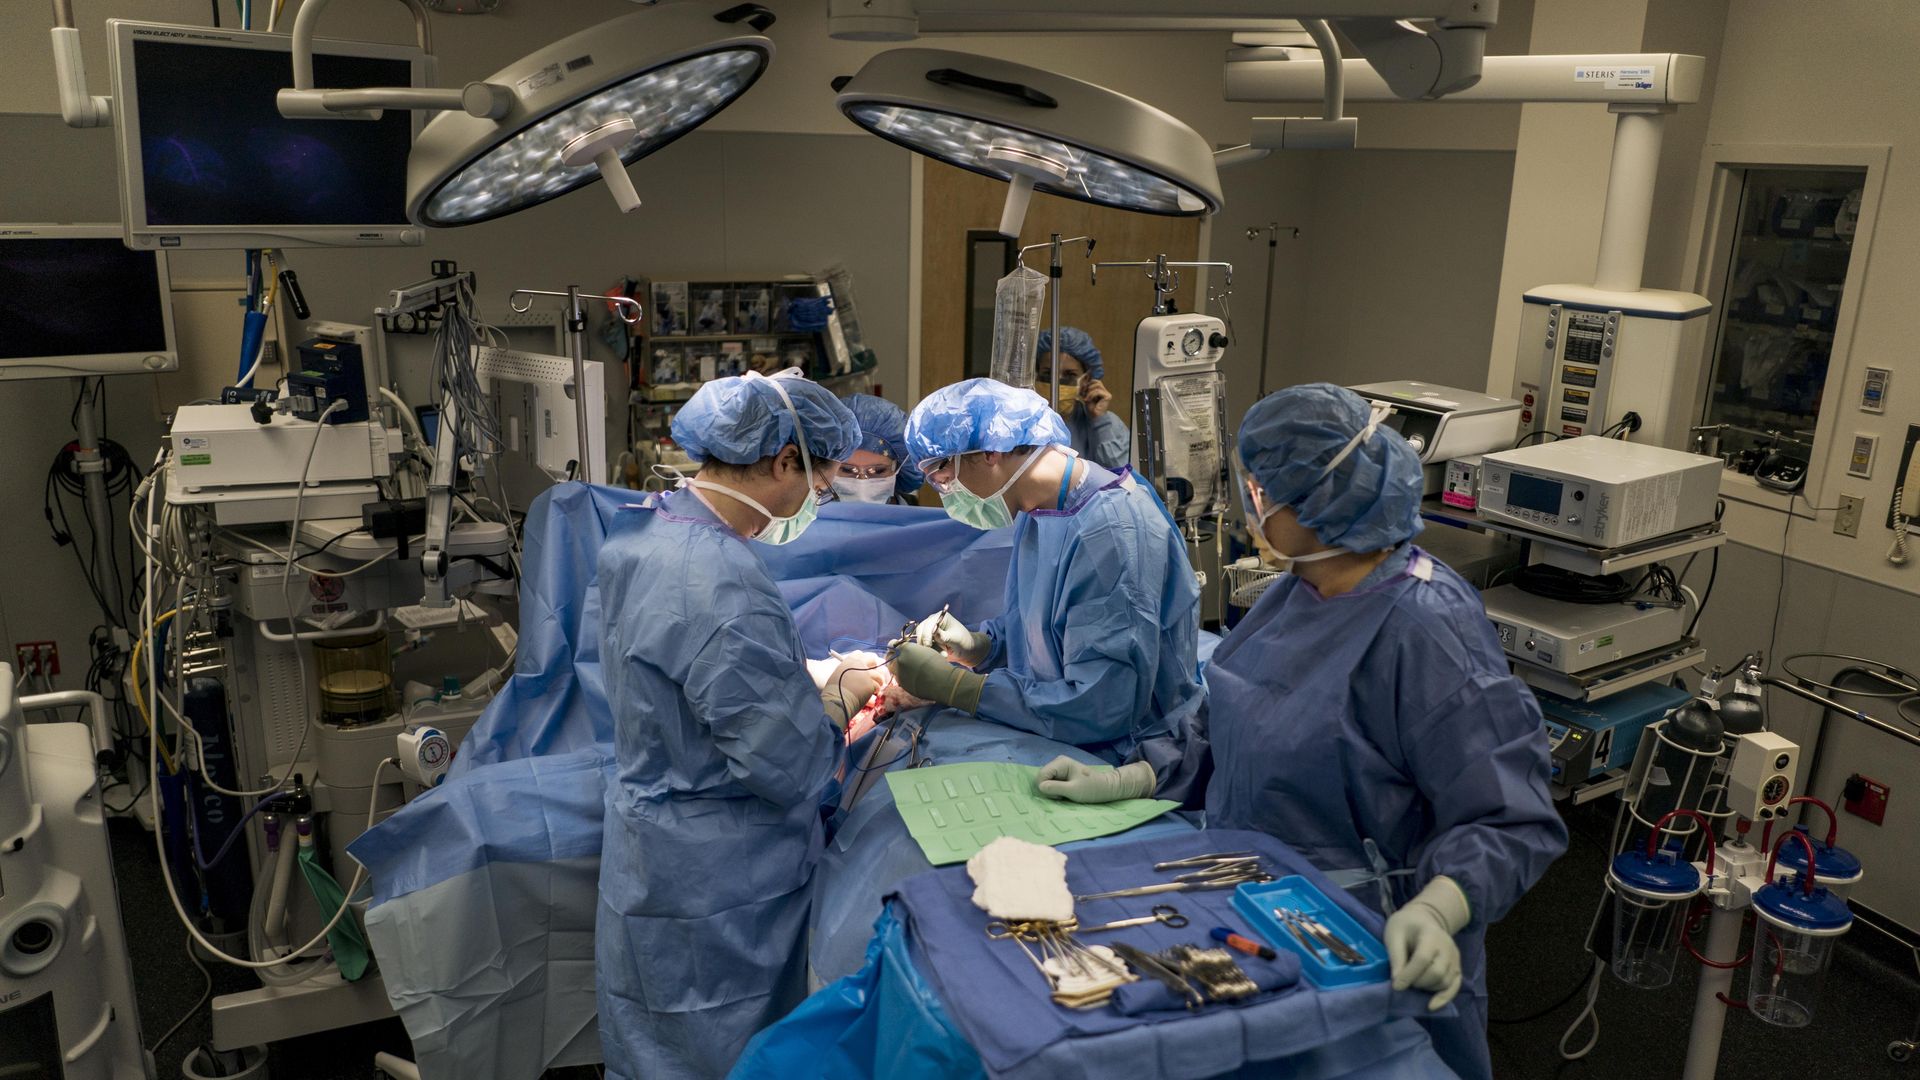 Surgeons and technicians in blue protective gear stand around a patient on an operating room table.